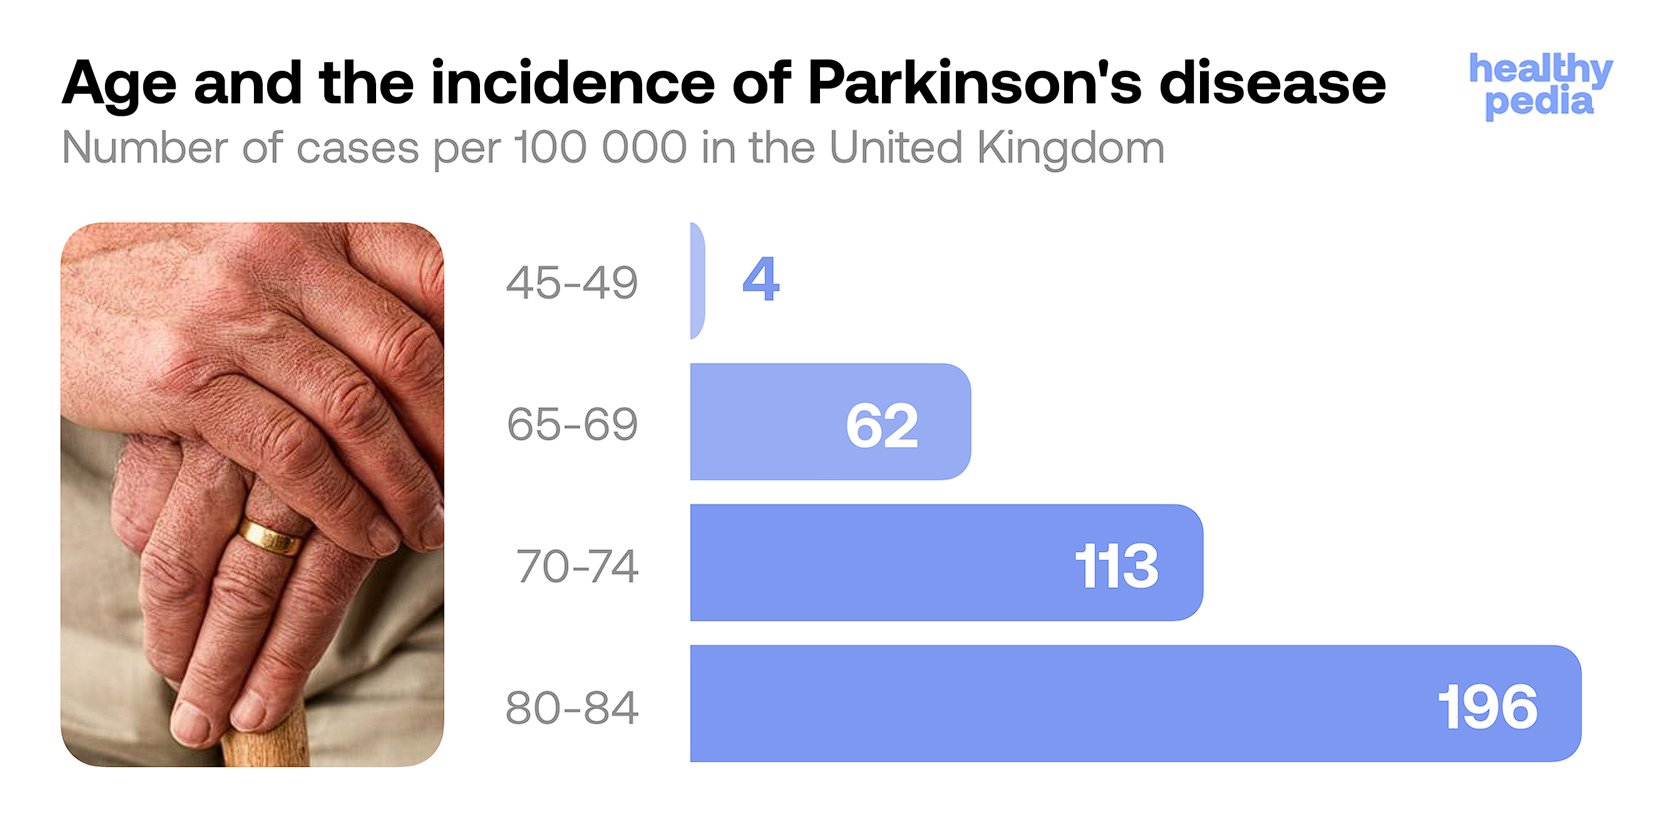 Age and the incidence of Parkinson's disease, stats